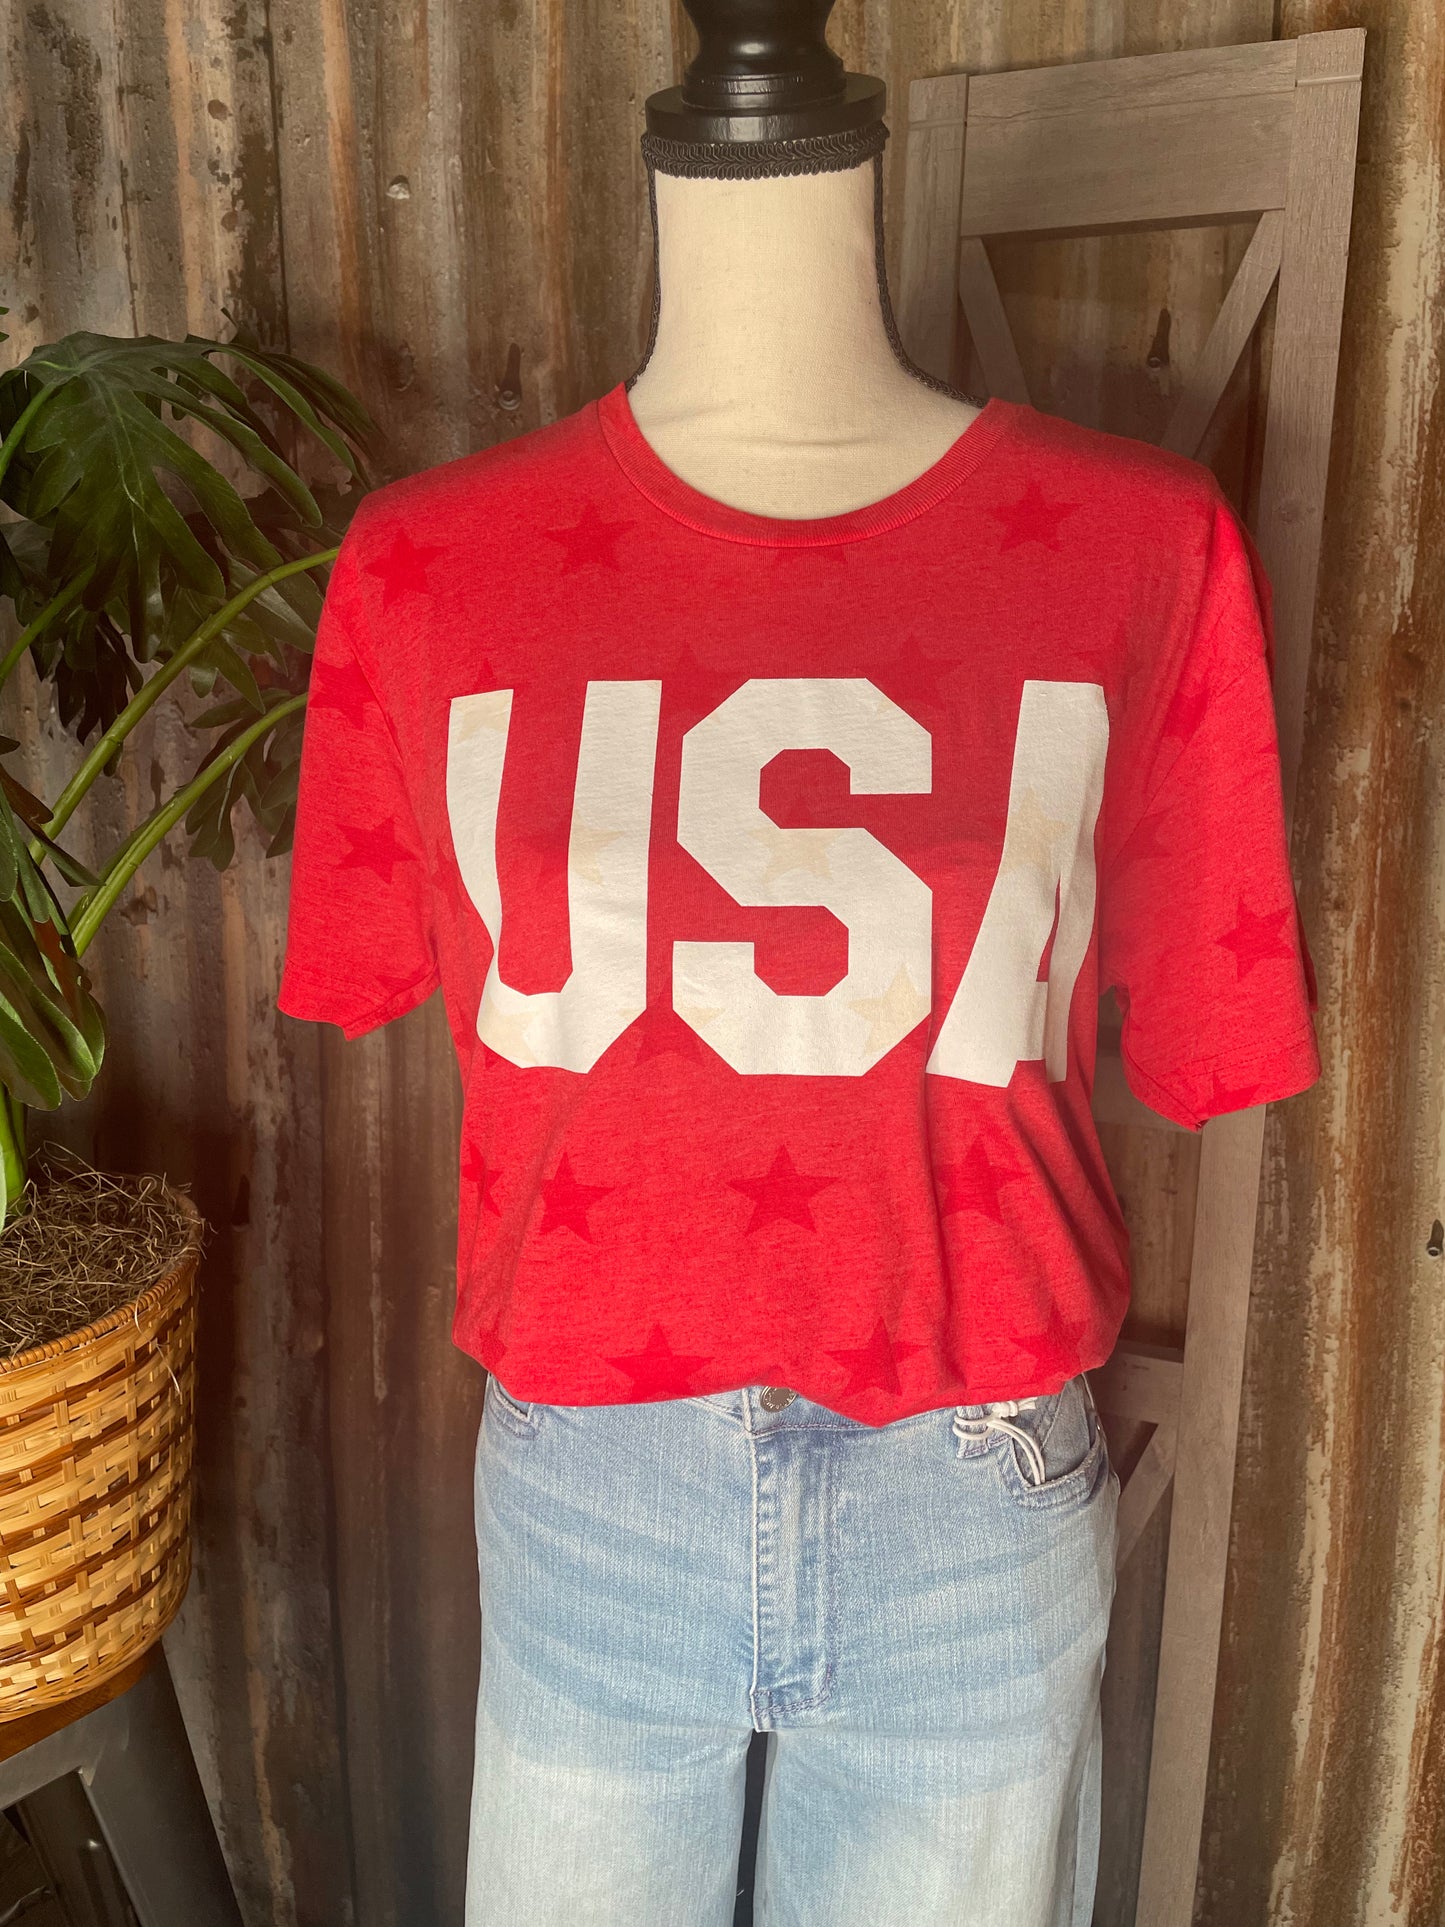 SHORT SLEEVE GRAPHIC RED STAR T-SHIRT